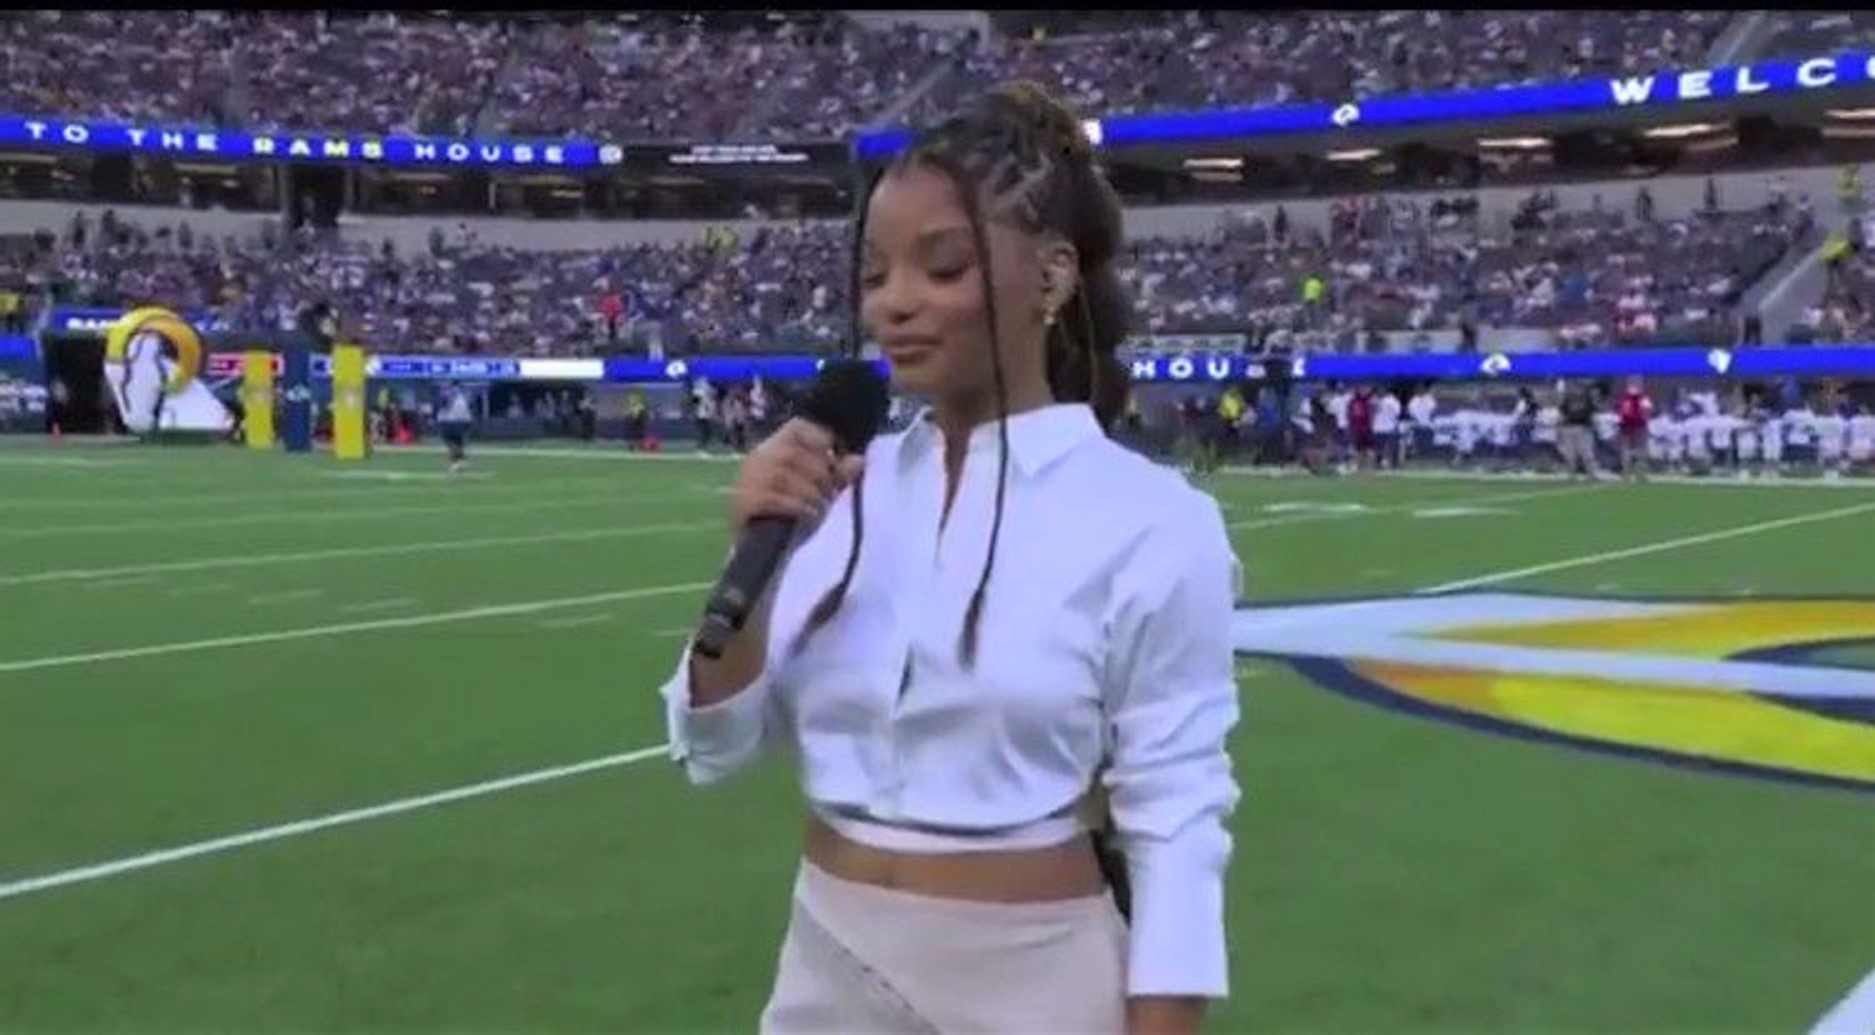 Watch: Halle Bailey Vocally Struggles Through Wobbly ‘Lift Every Voice’ Performance at Rams v Bills Game